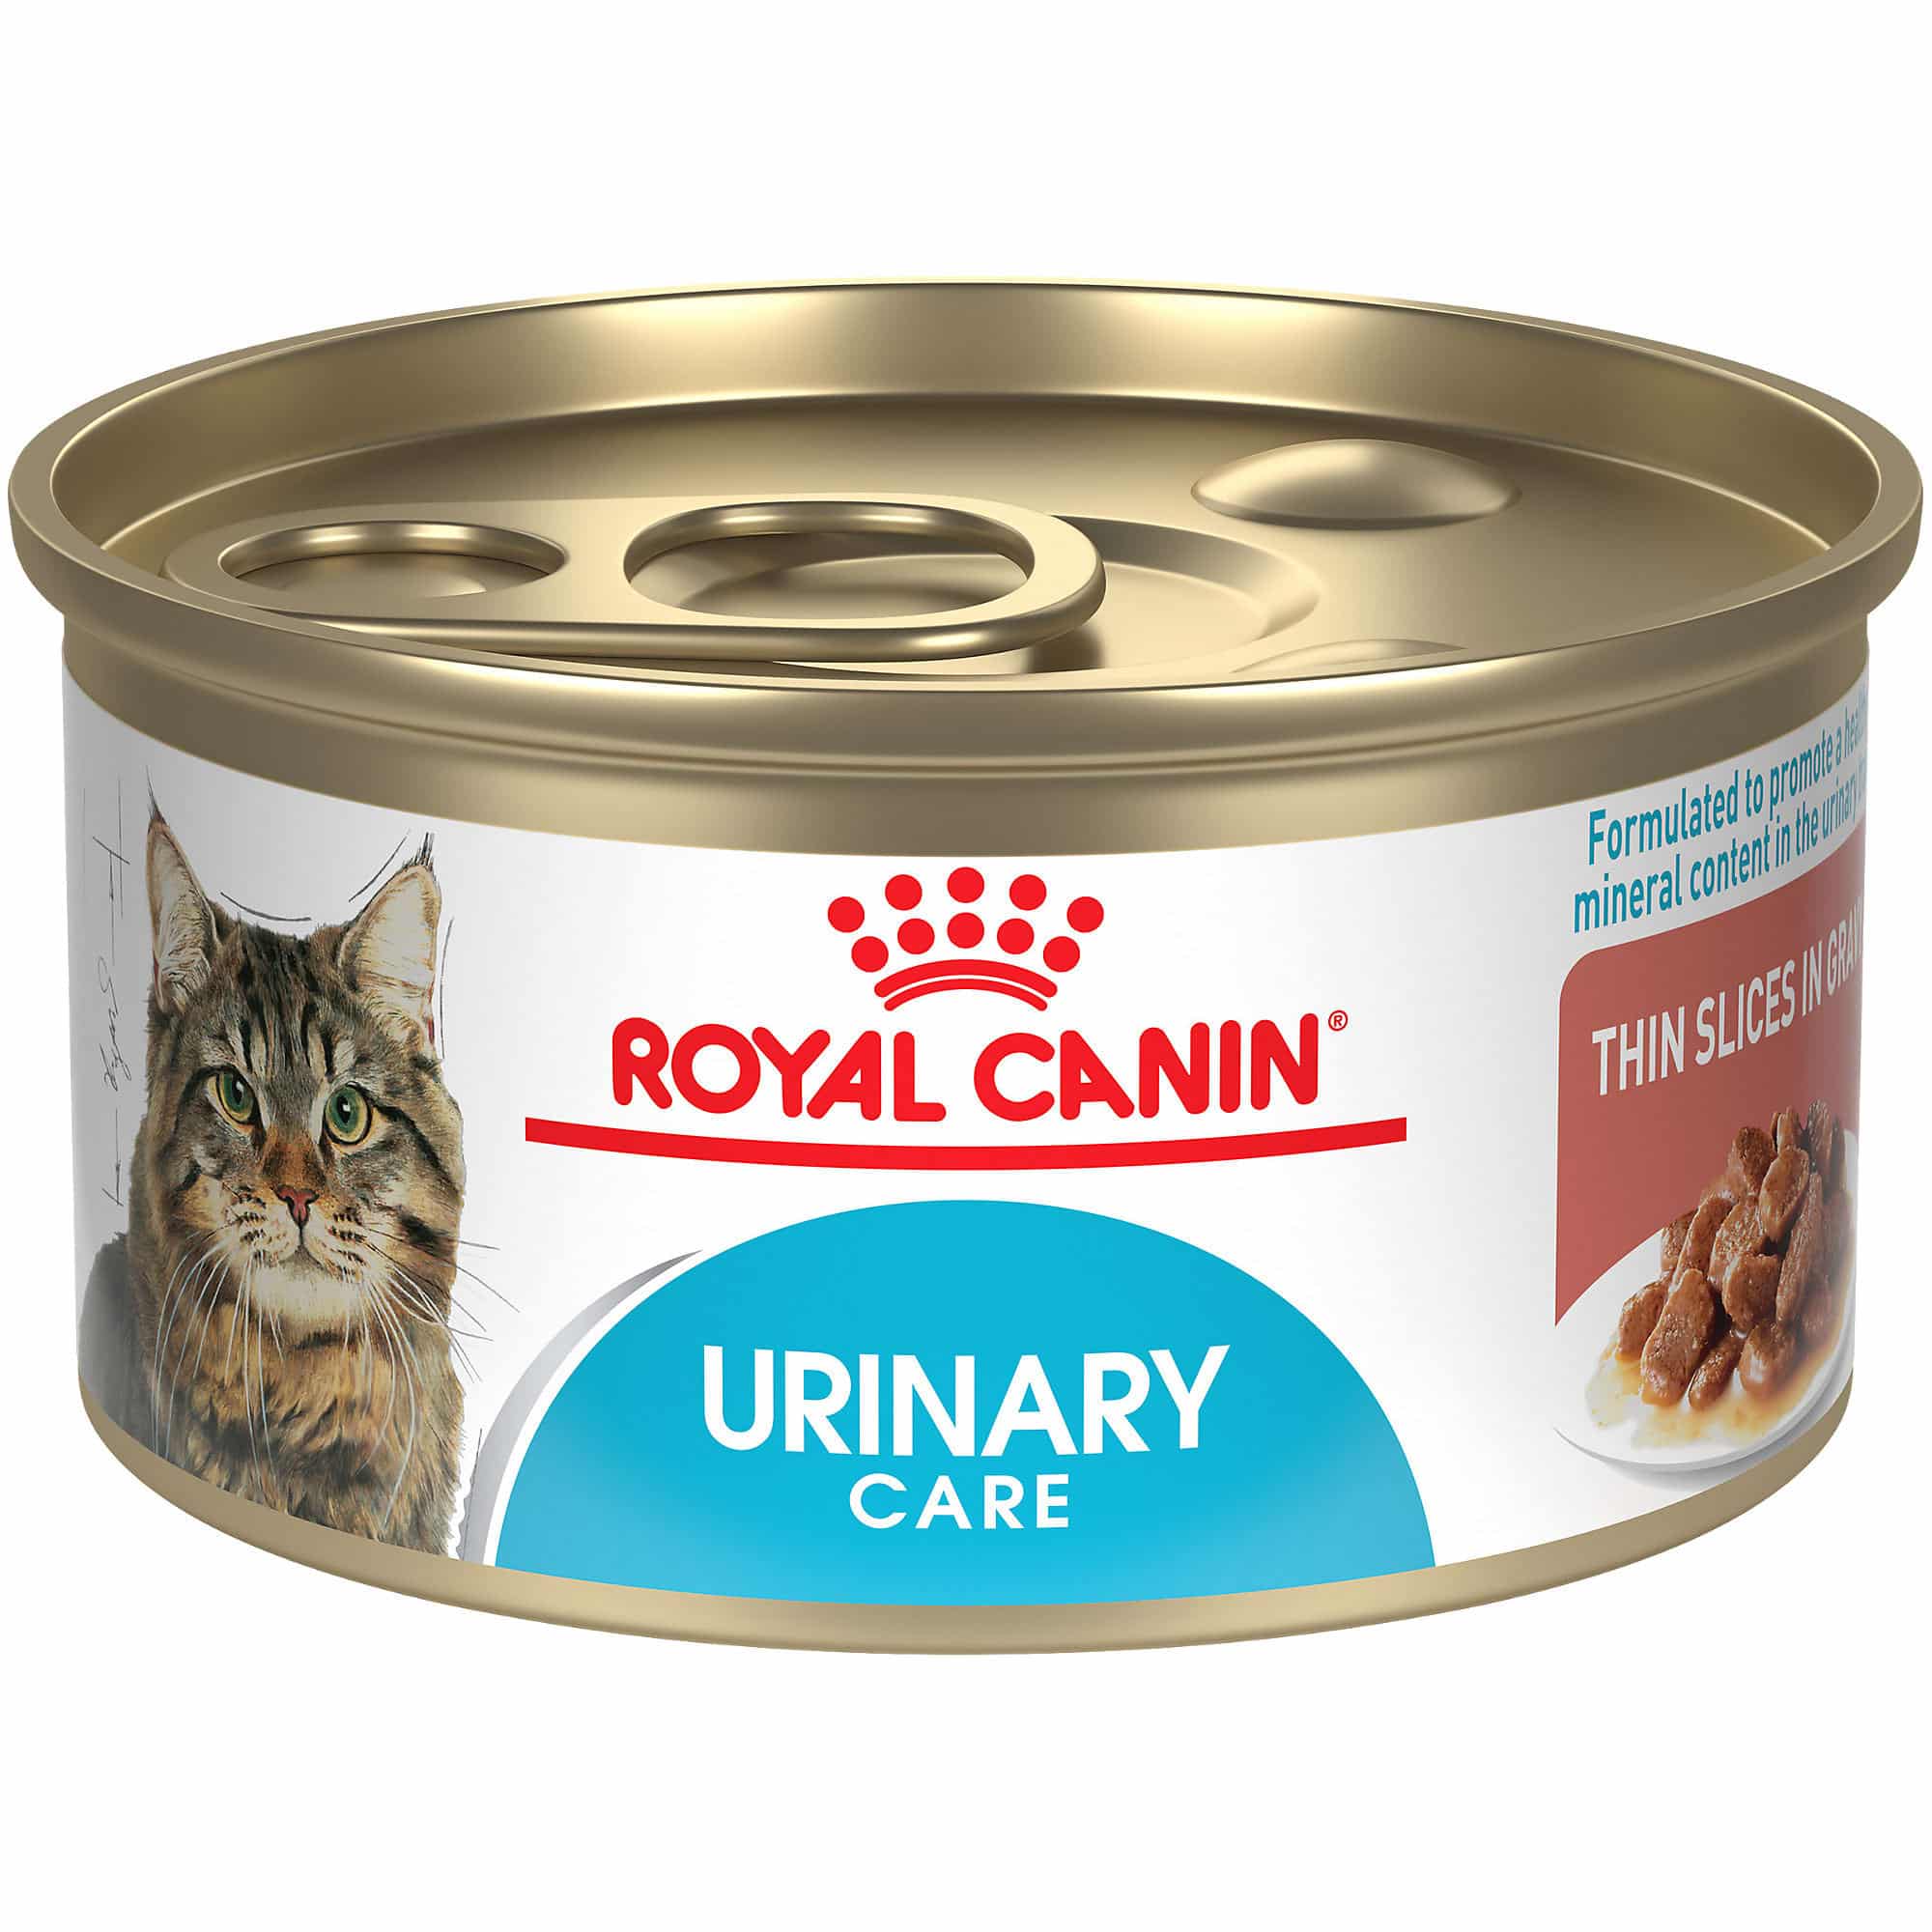 Royal Canin Feline Urinary Care Thin Slices in Gravy Wet Cat Food, 3 oz ...